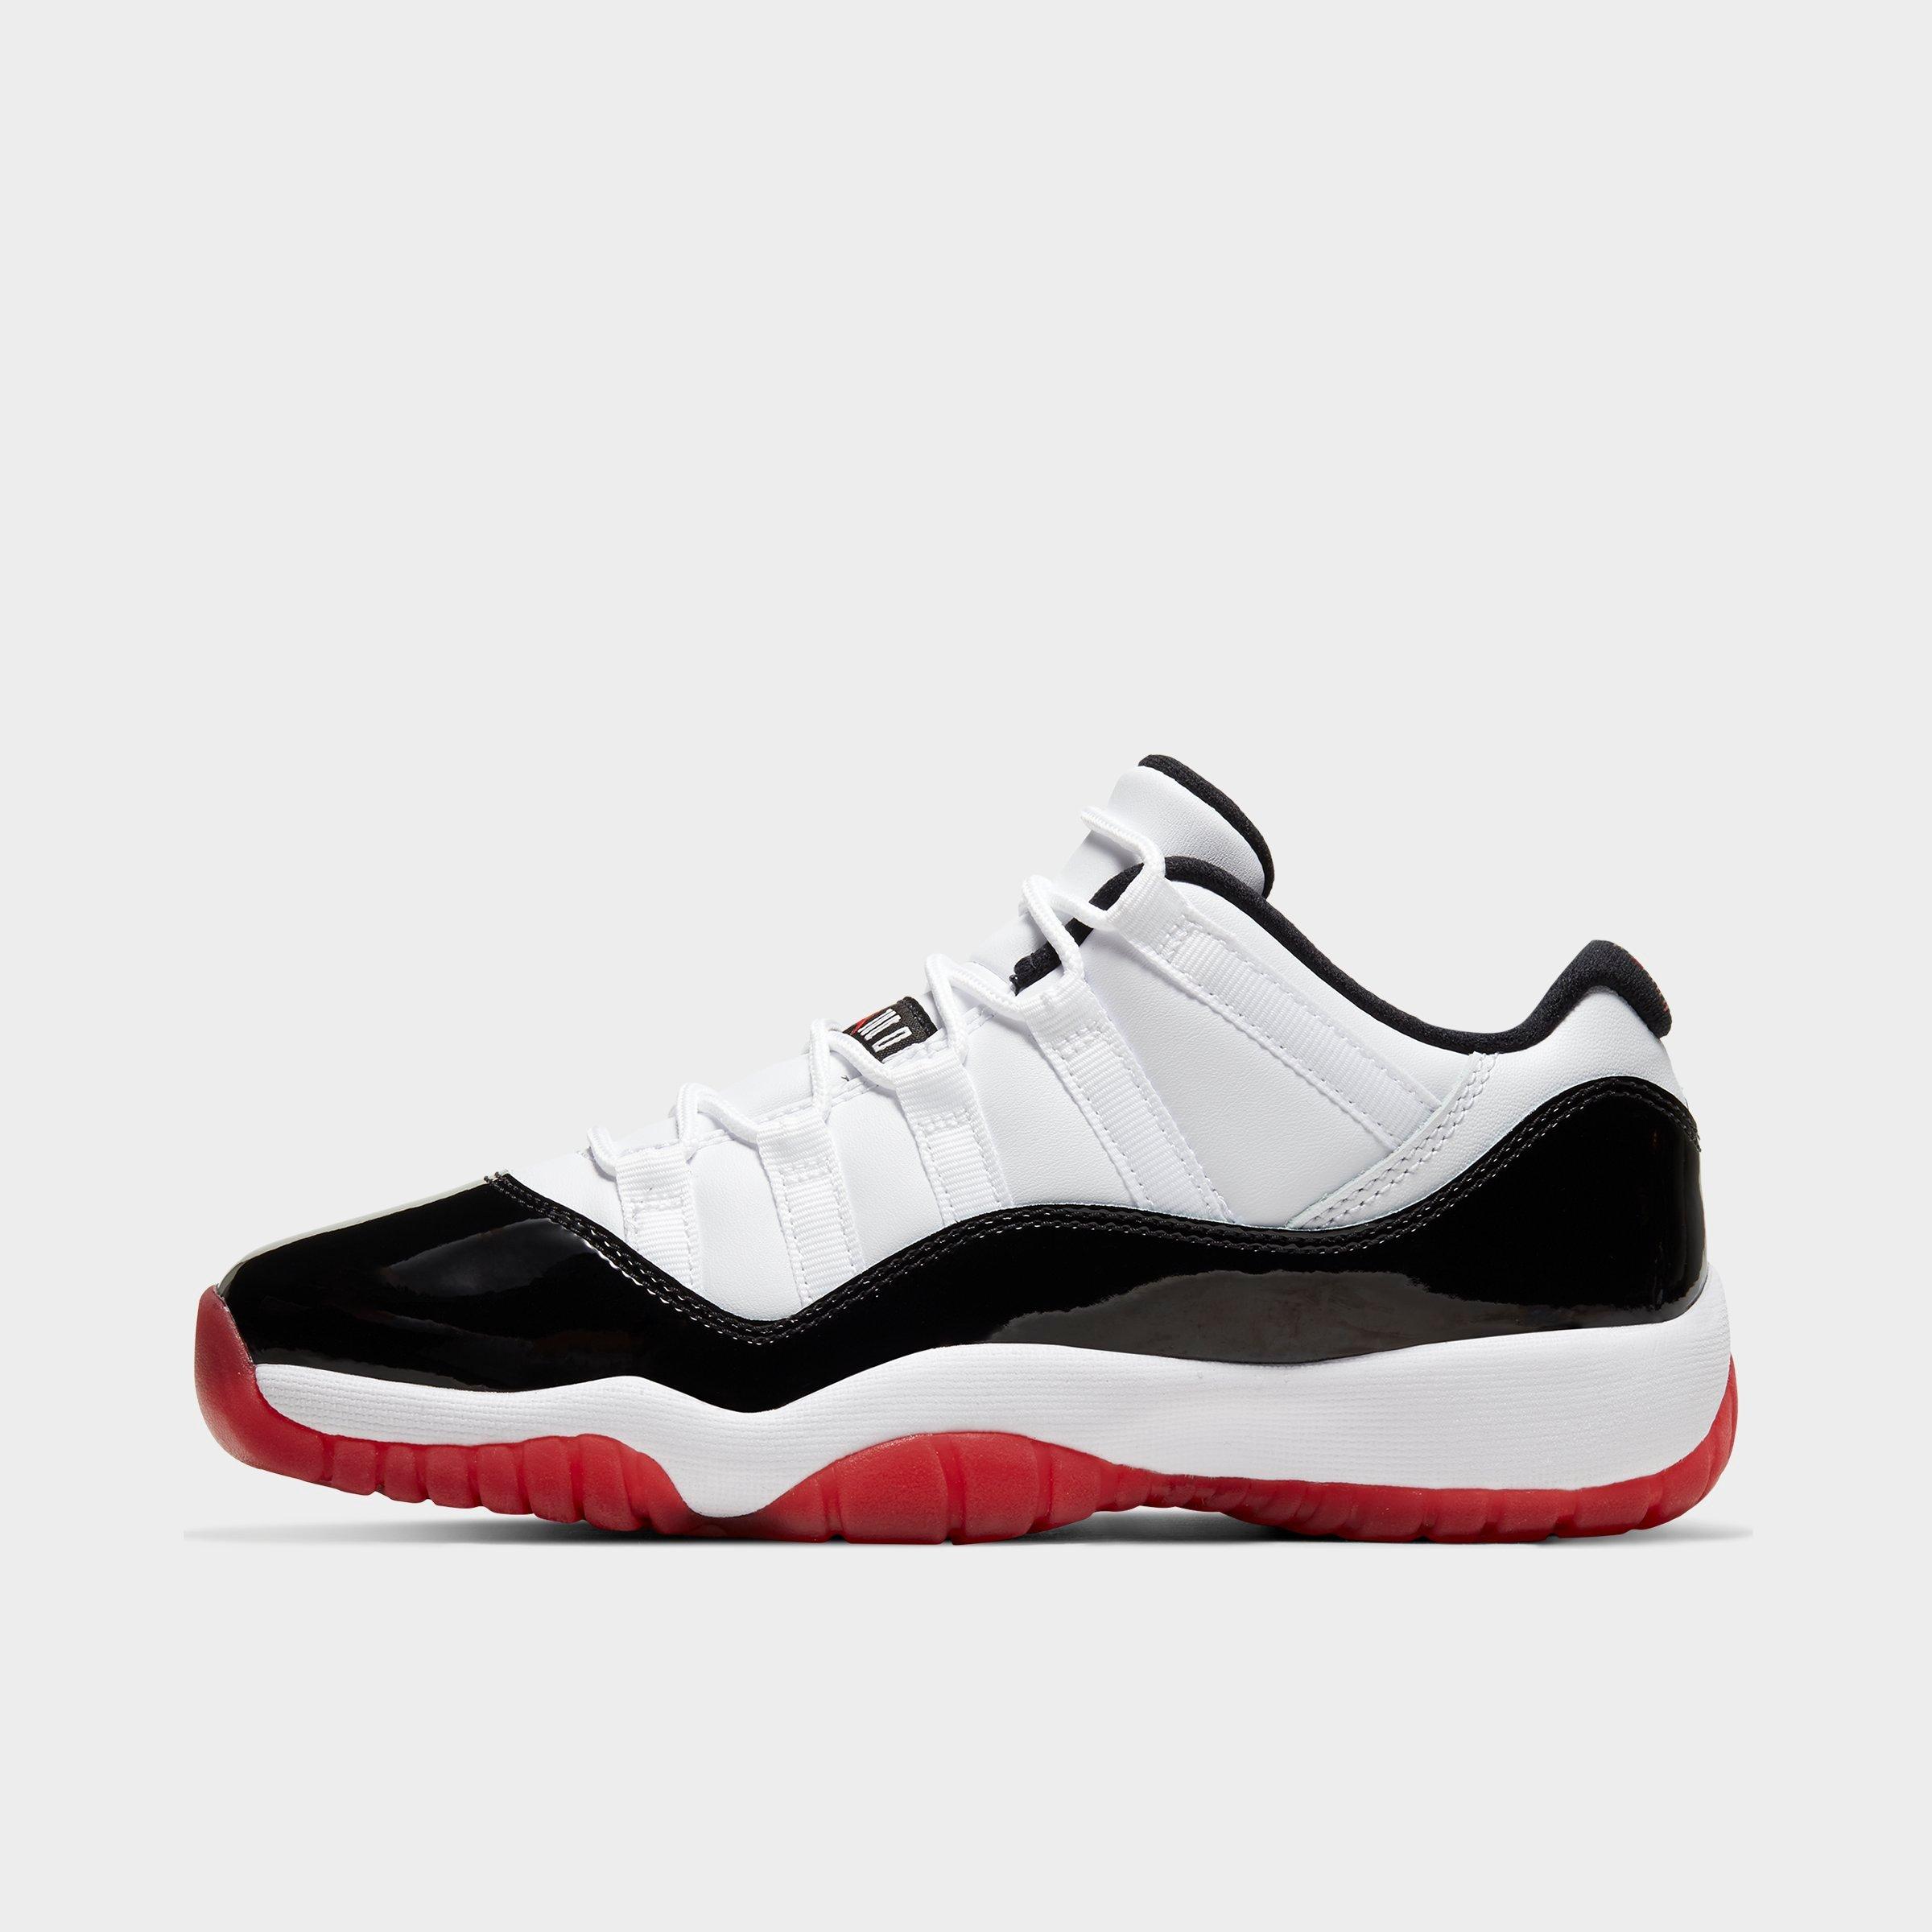 finish line concords cheap online